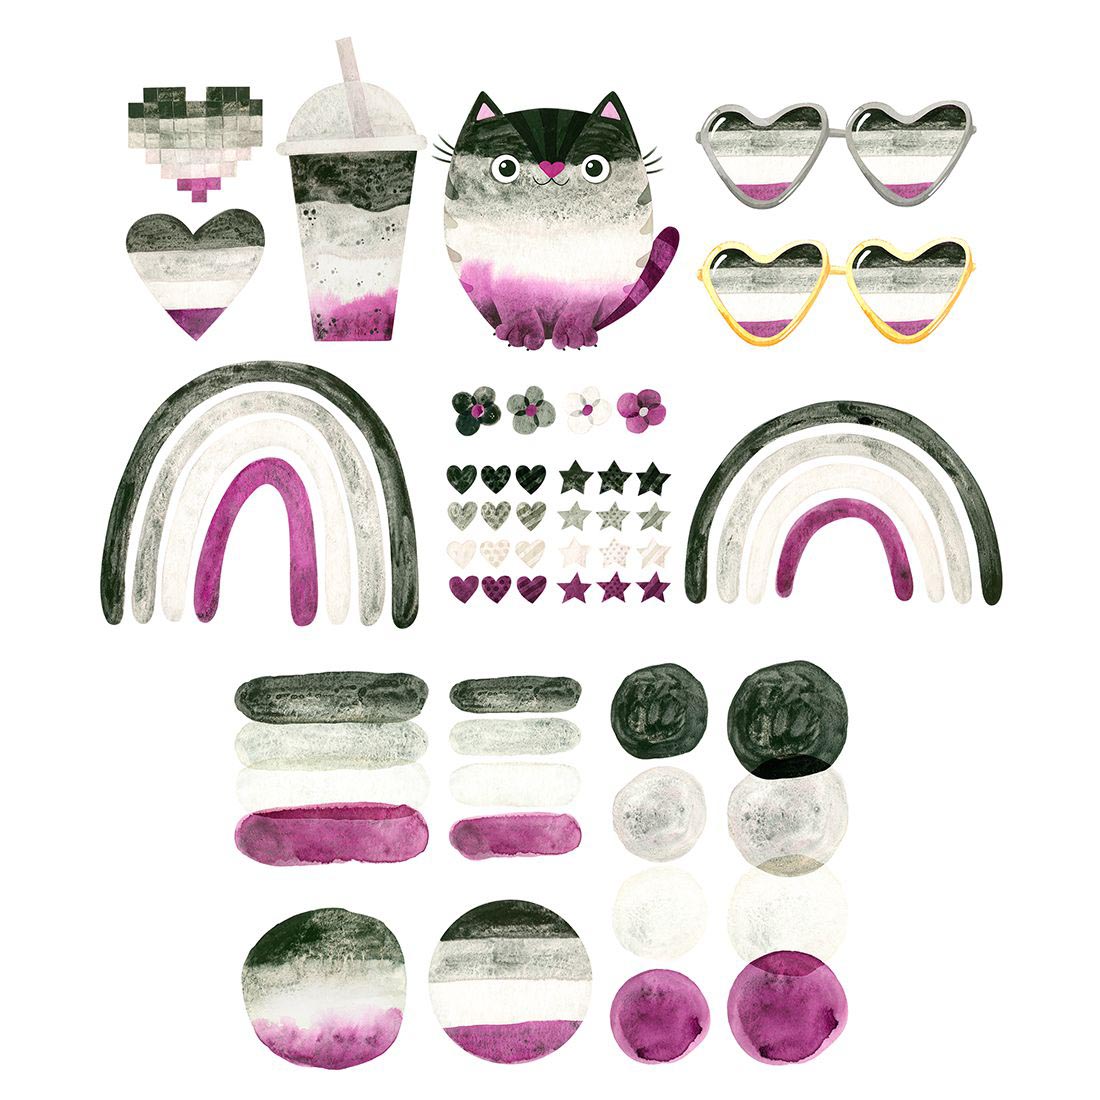 Asexual Watercolor Clipart and Seamless Pattens cover image.